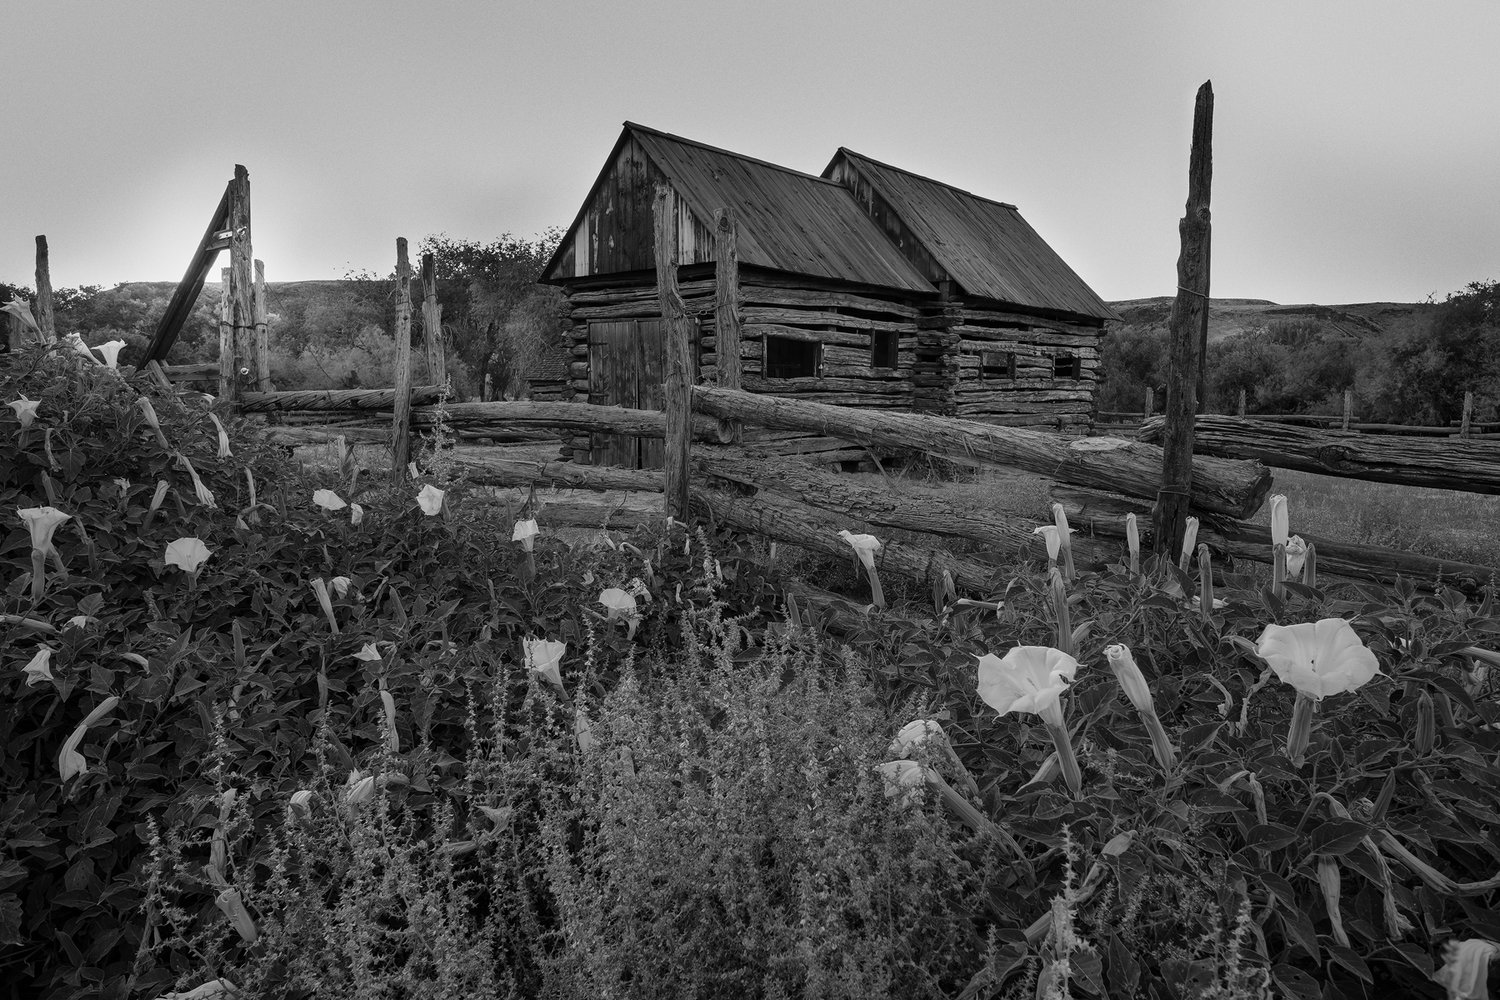 Datura and Cabin • Grafton Ghost Town, Springdale, Utah. Fuji X-T2 and a Fujinon XF10-24mm f4 OIS at 10mm. Image exposed at ISO 200 at f13 for 1/100 of a second.